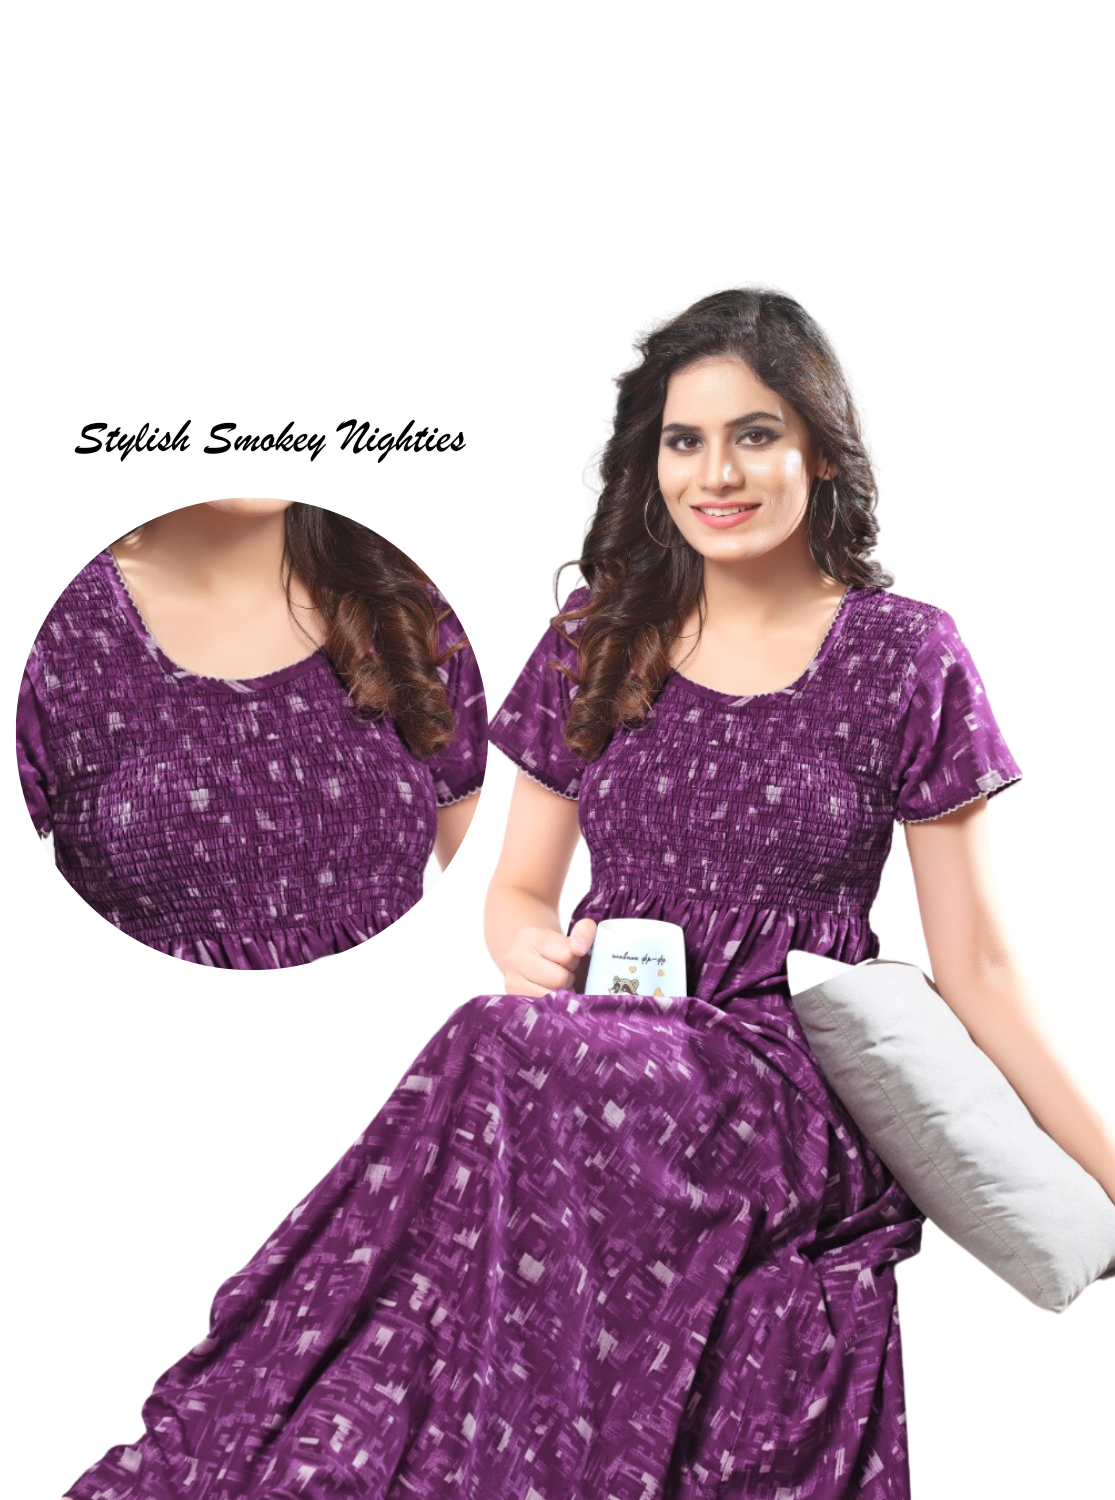 New Collection's ONLY MINE Premium Synthetic Smokey Nighty | Beautiful Pleated Design | Side Pocket | Stylish Nighty for Stylish Women's